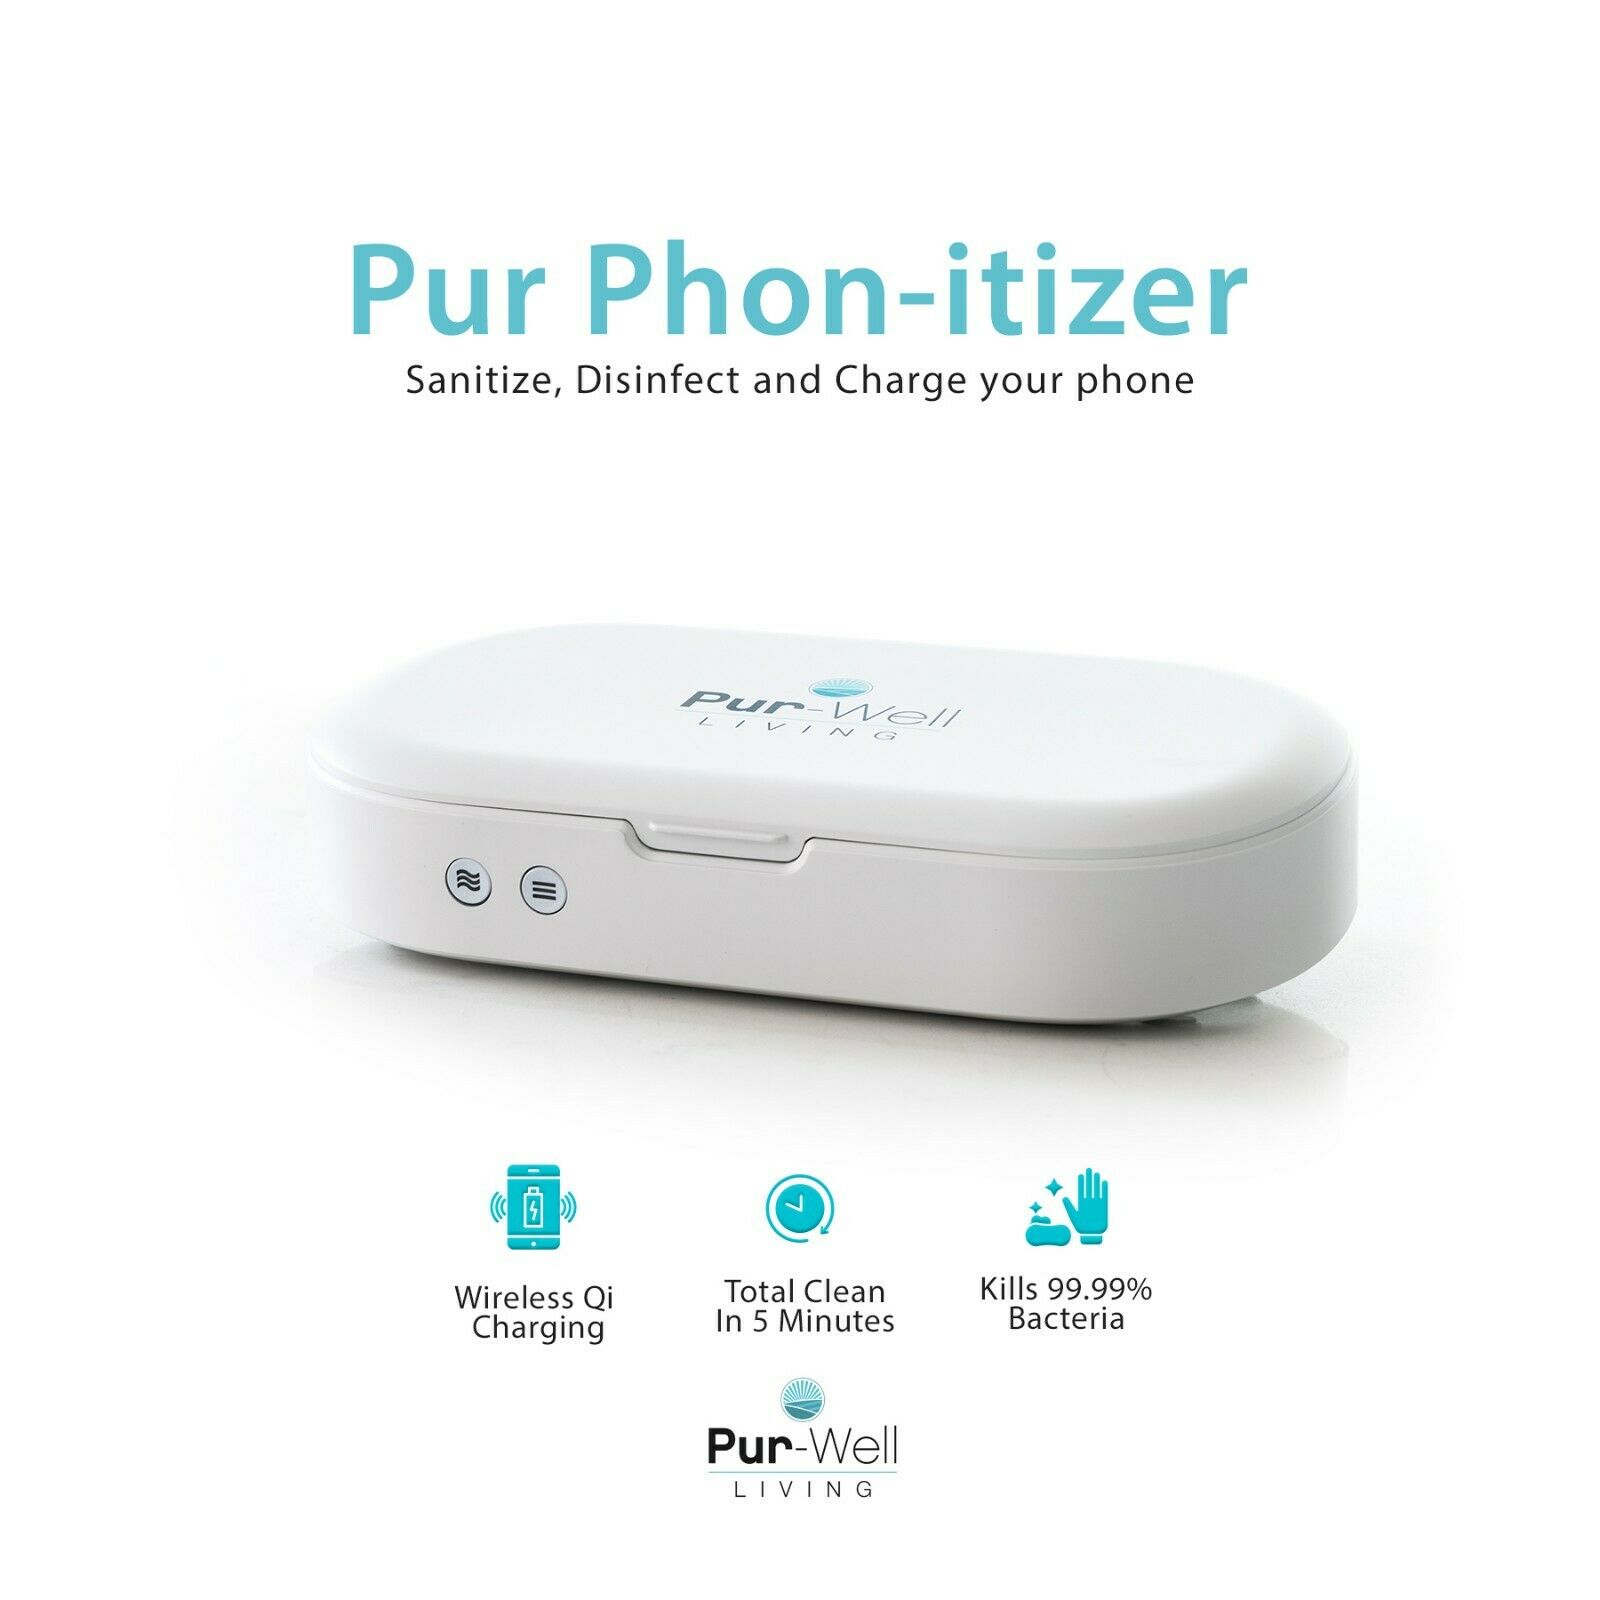 Pur Phon-itizer UV Light Phone Sanitizer | UV Sanitize Disinfect Charge Your Cell Phone Qi by Pur-Well Living - image 1 of 8